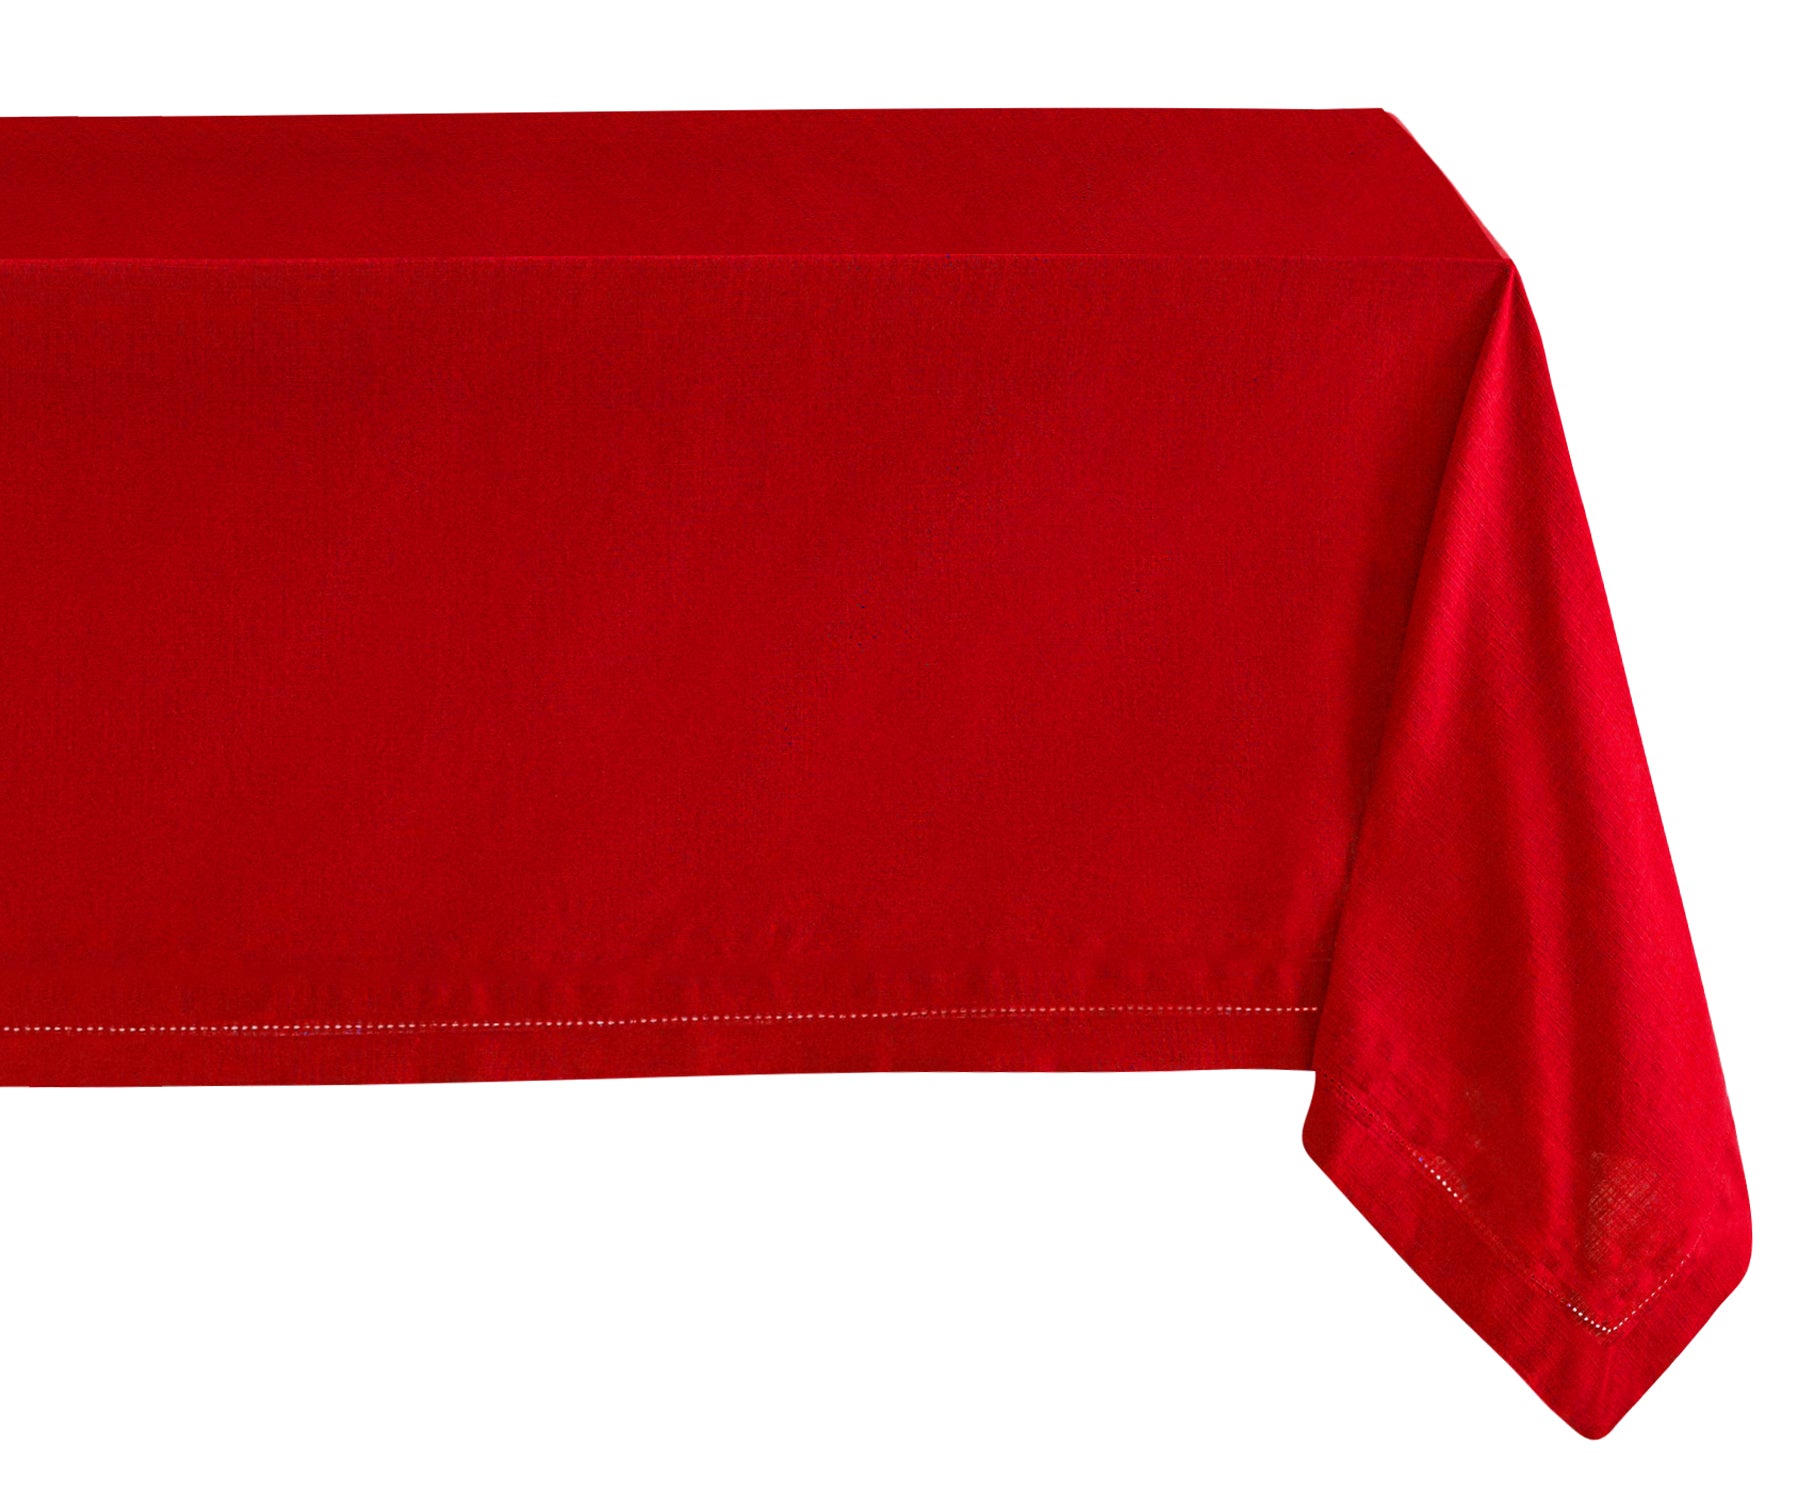 "Embrace warmth with red, elevate with fabric textures, and celebrate Christmas with our versatile tablecloth selection."